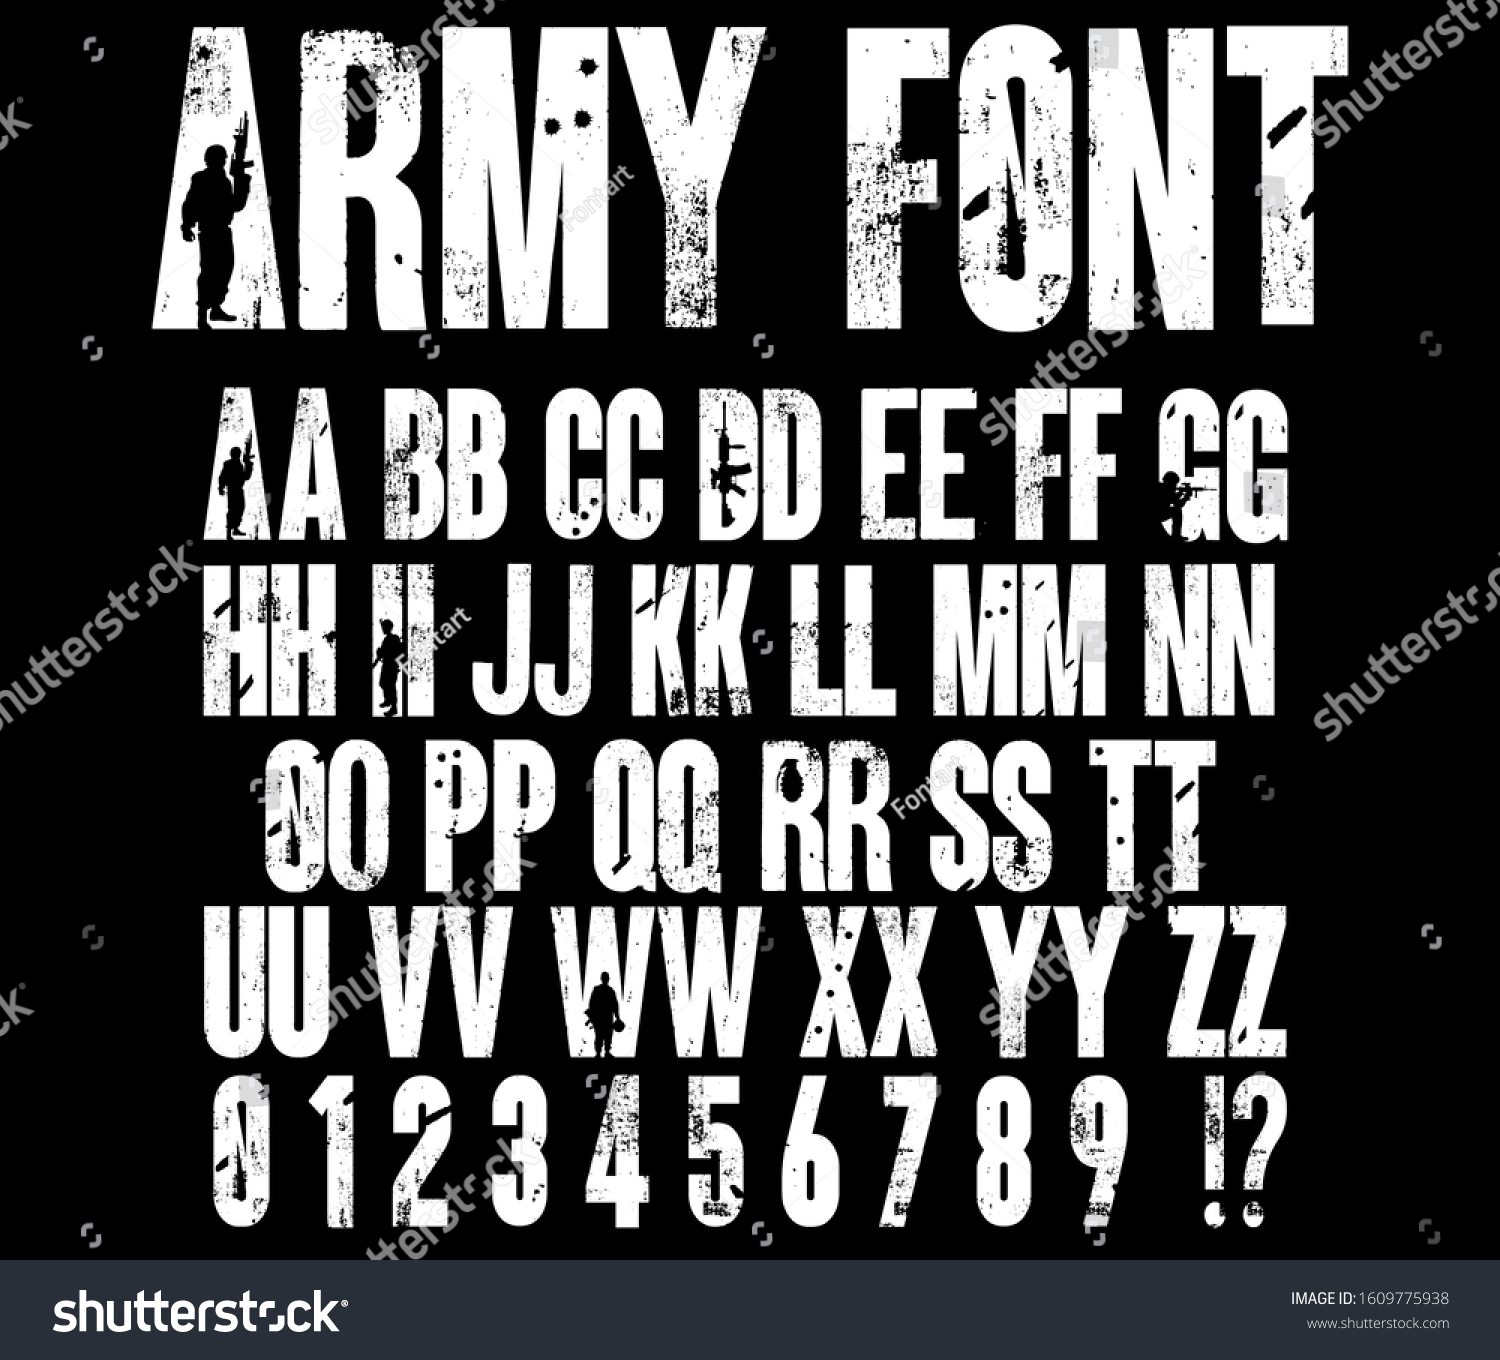 SVG of Army font vector. Silhouettes of soldiers on the background distressed letters and numbers. svg